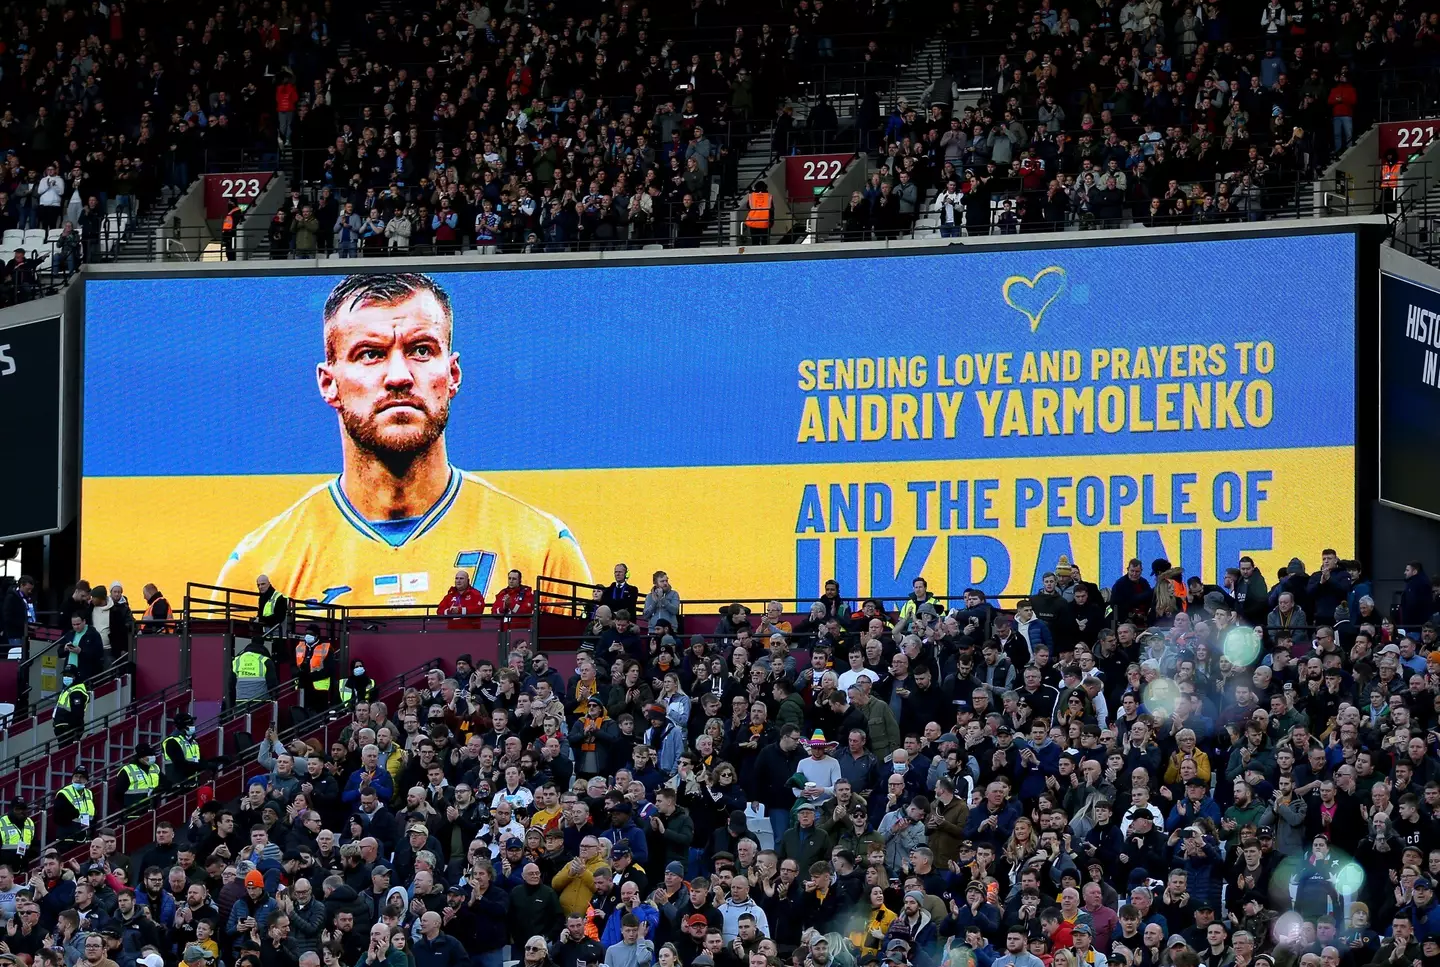 West Ham showed their support for Yarmolenko and Ukraine last weekend (Image: PA)